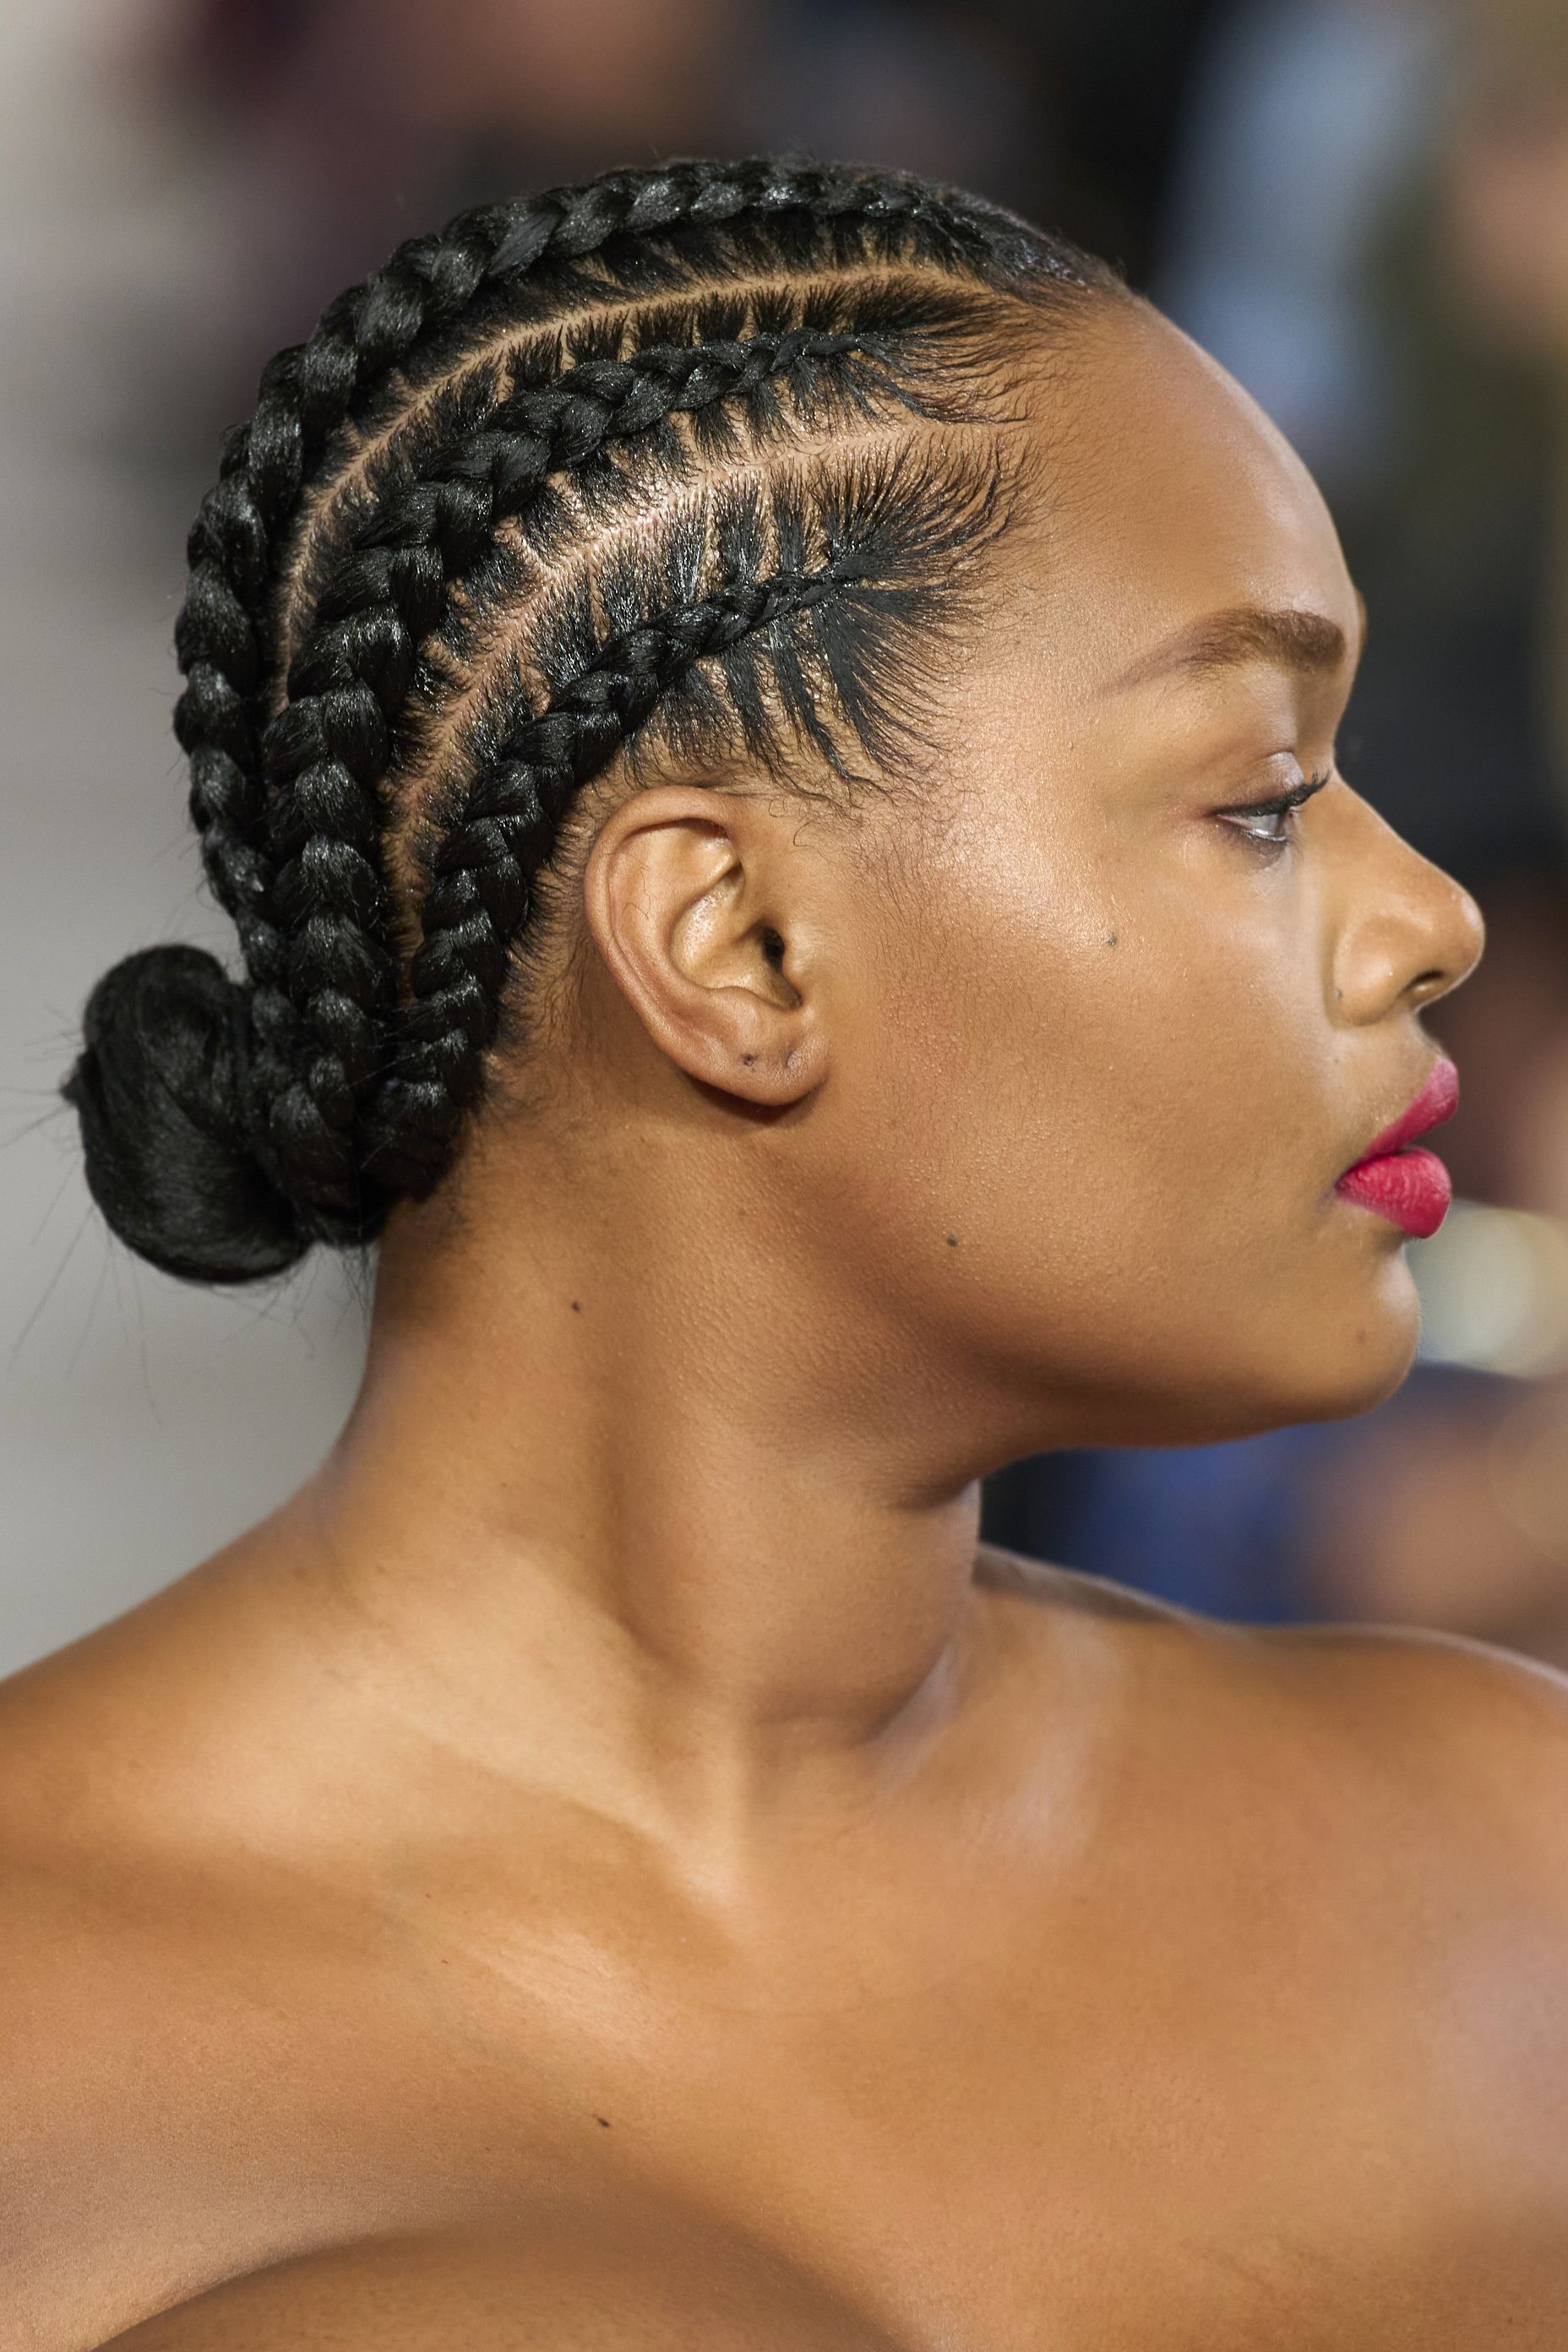 13 Easy Ways to Style Your Hair for Every Christmas Party This Year   Byrdiecom  Bloglovin